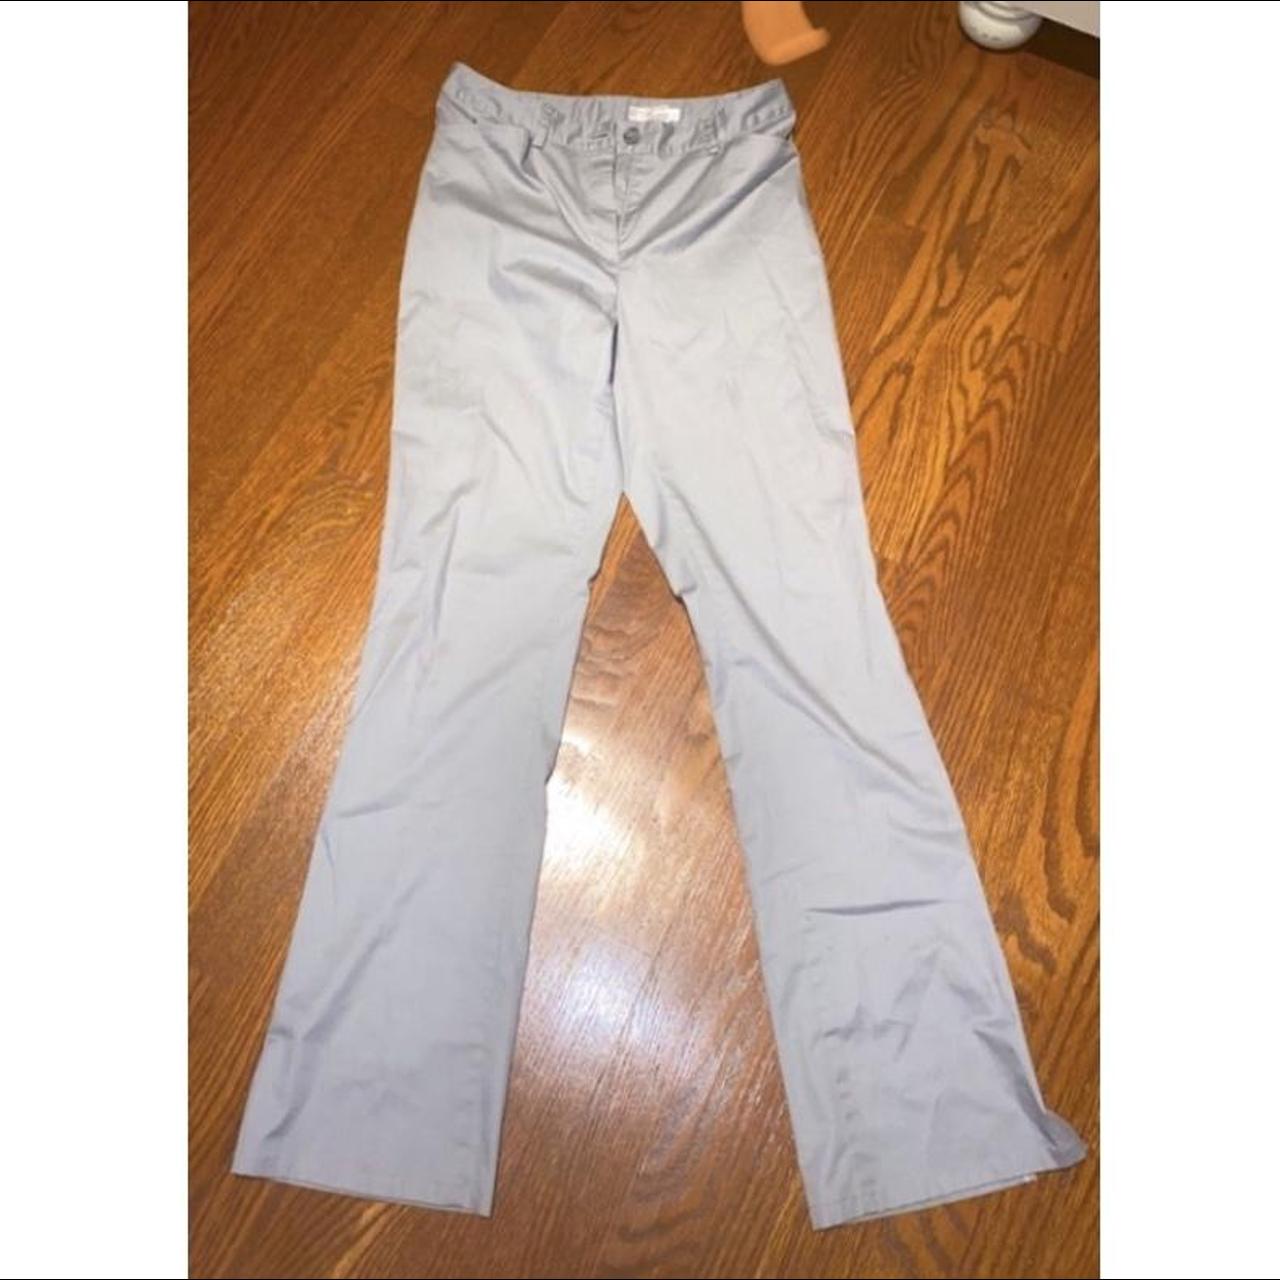 BOOTCUT WORK PANTS, -GREAT CONDITION, -NICE MATERIAL